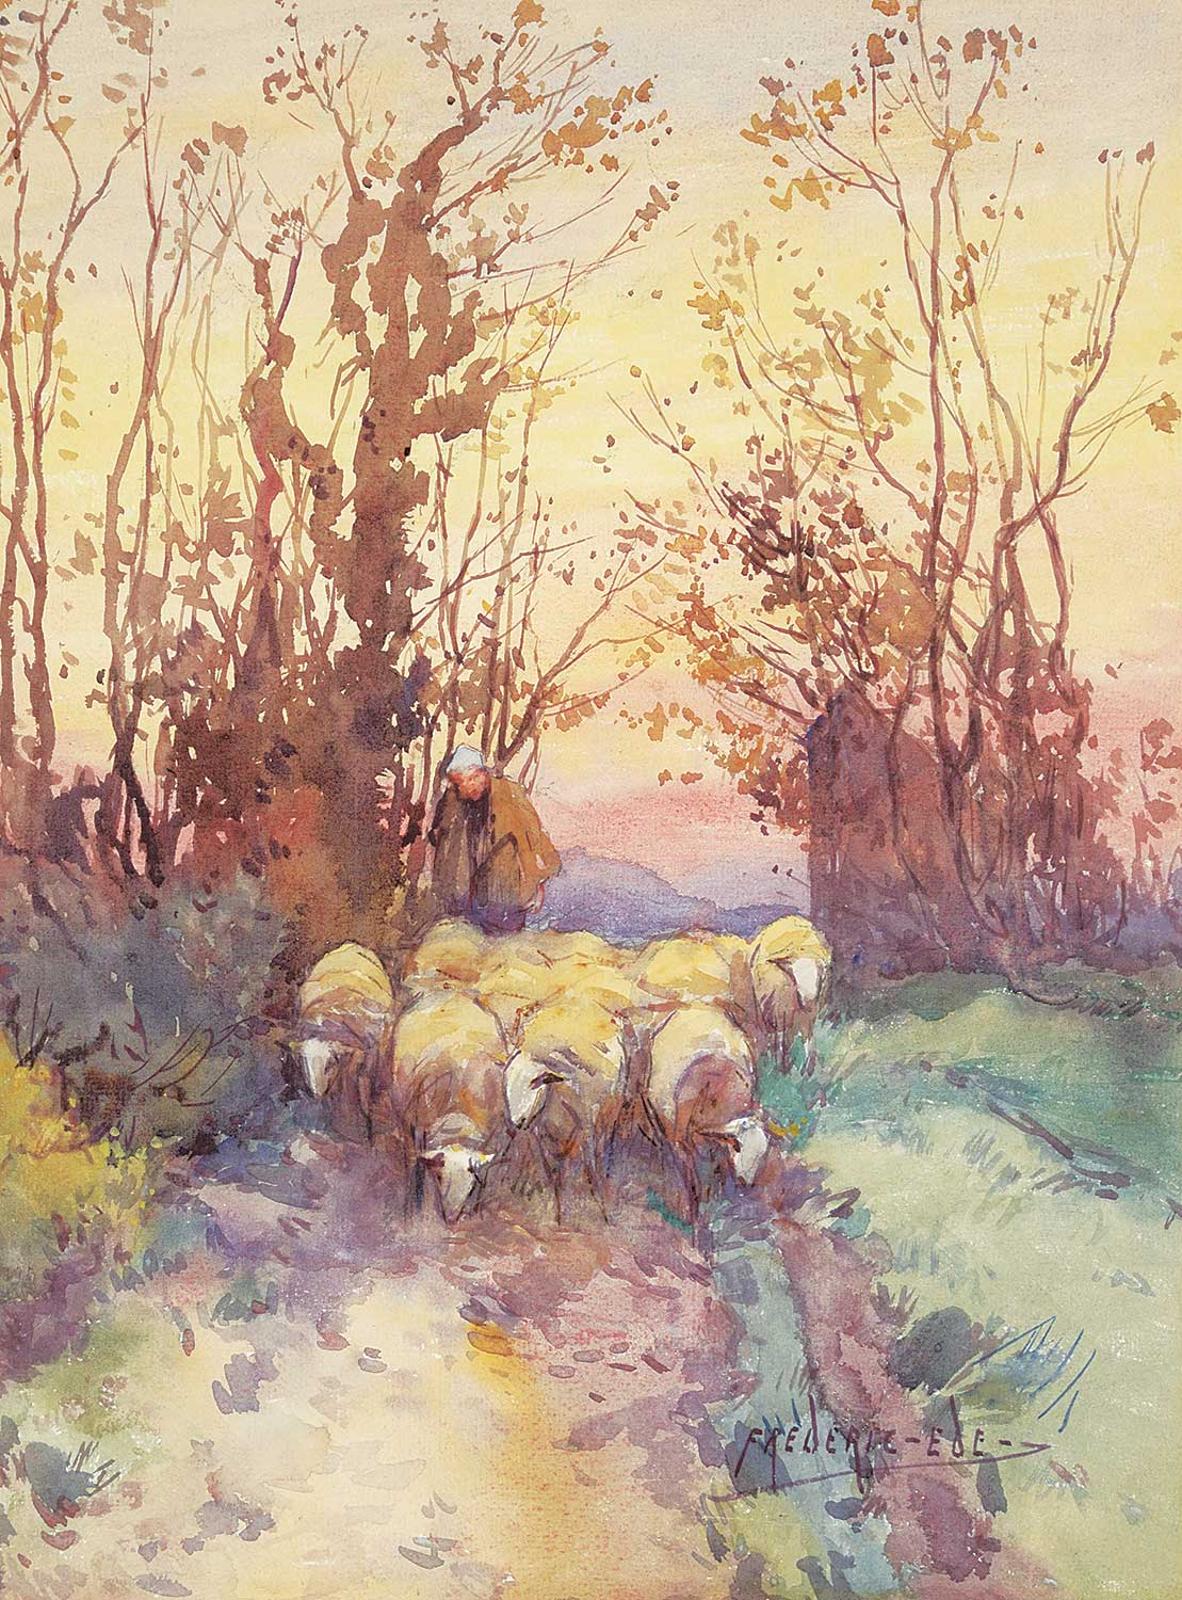 Frederick Charles Vipond Ede (1865-1907) - Untitled - Taking the Flock Home